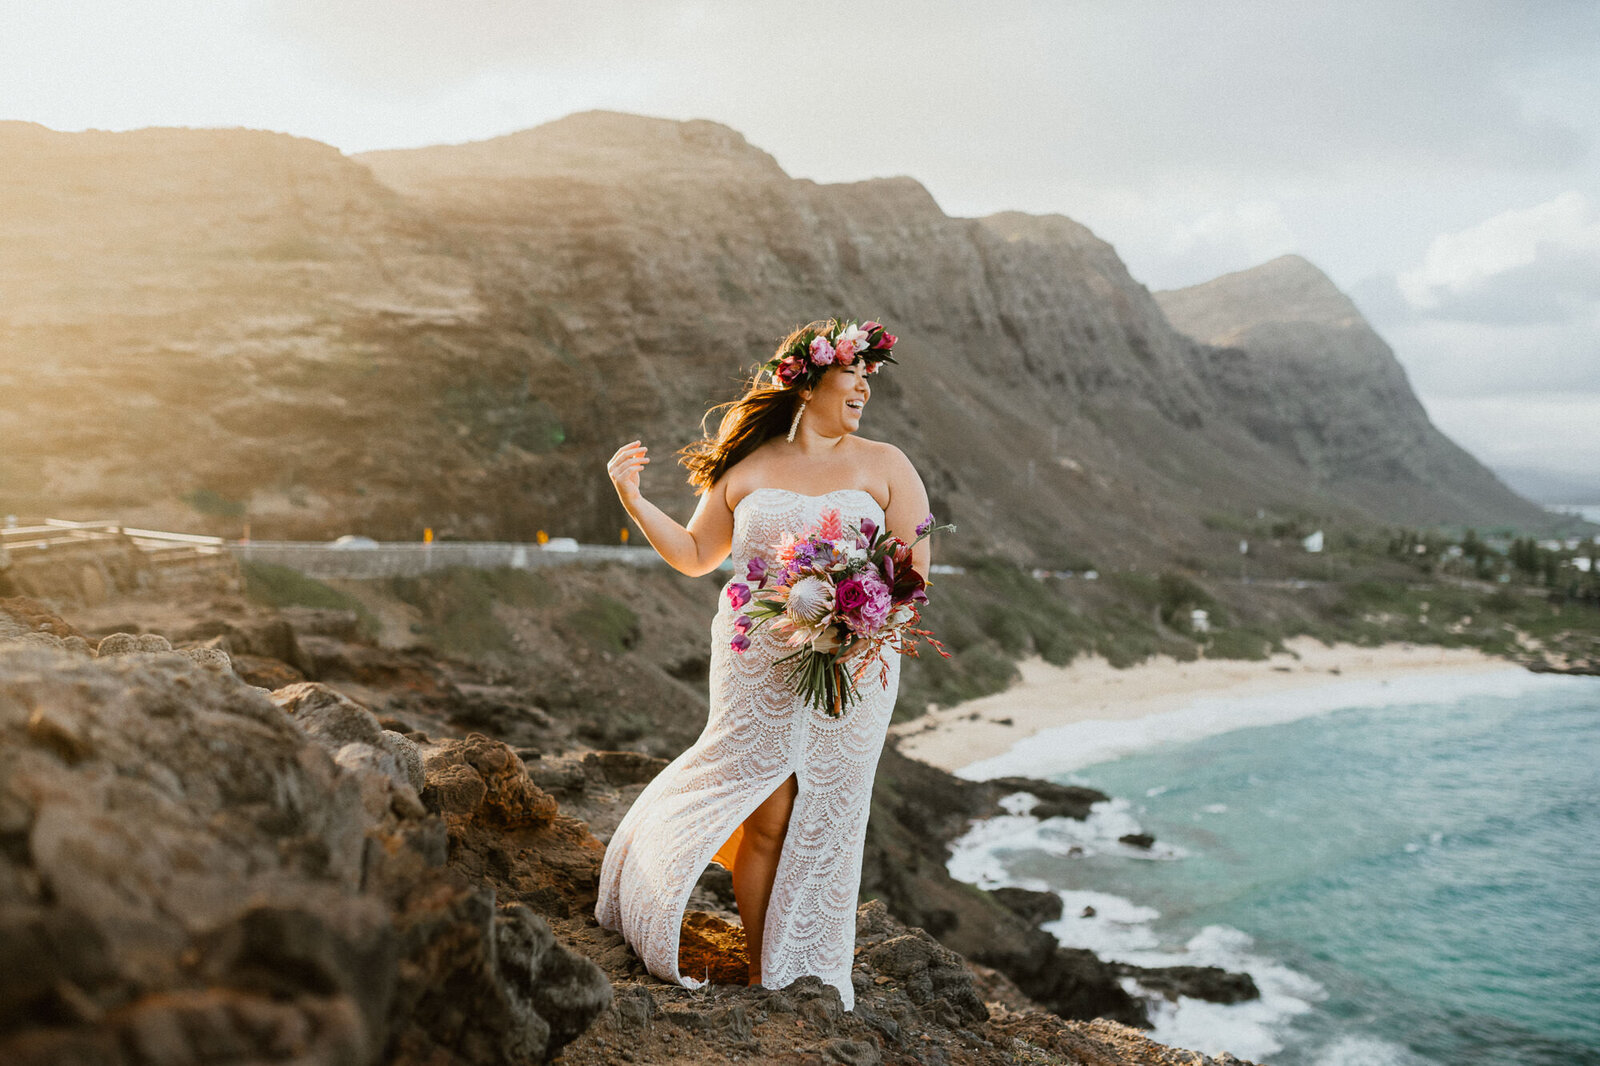 makapuu-elopement-hawaii-mini-wedding-lily-anthony-chelsea-abril-photography-209